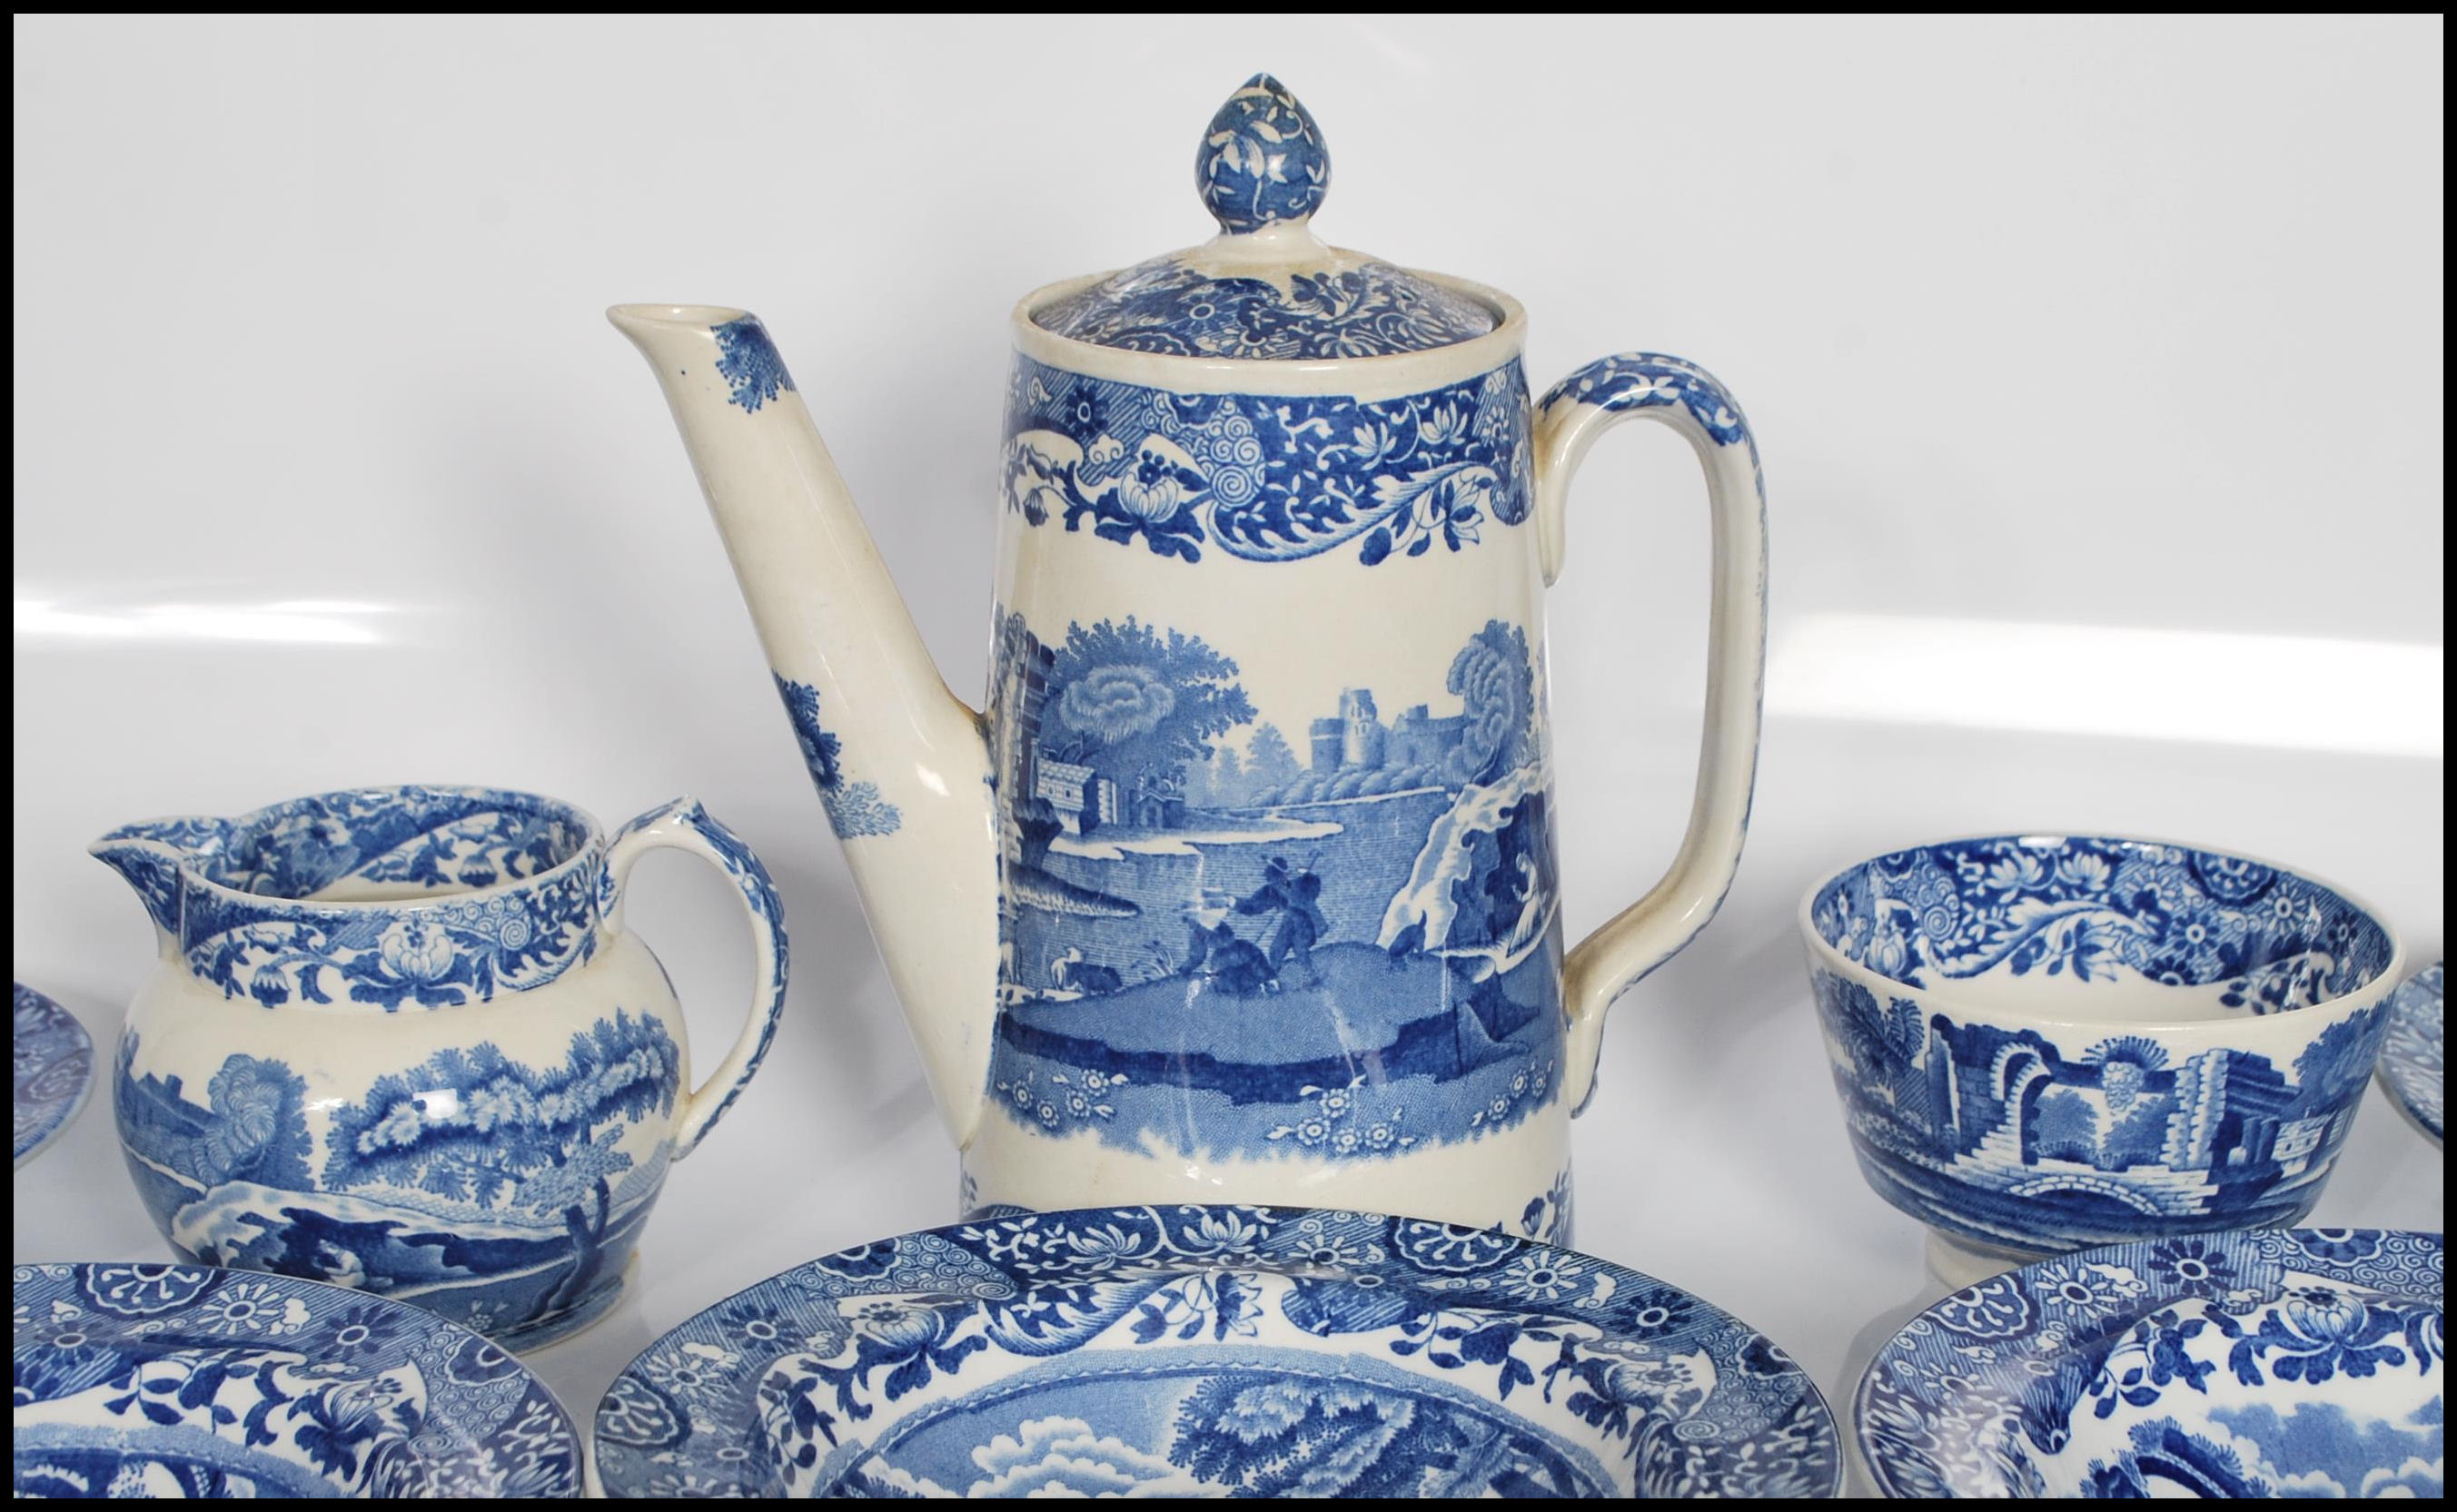 A mid 20th Century Copeland and Spode coffee services in the transfer printed Italian pattern - Image 3 of 7